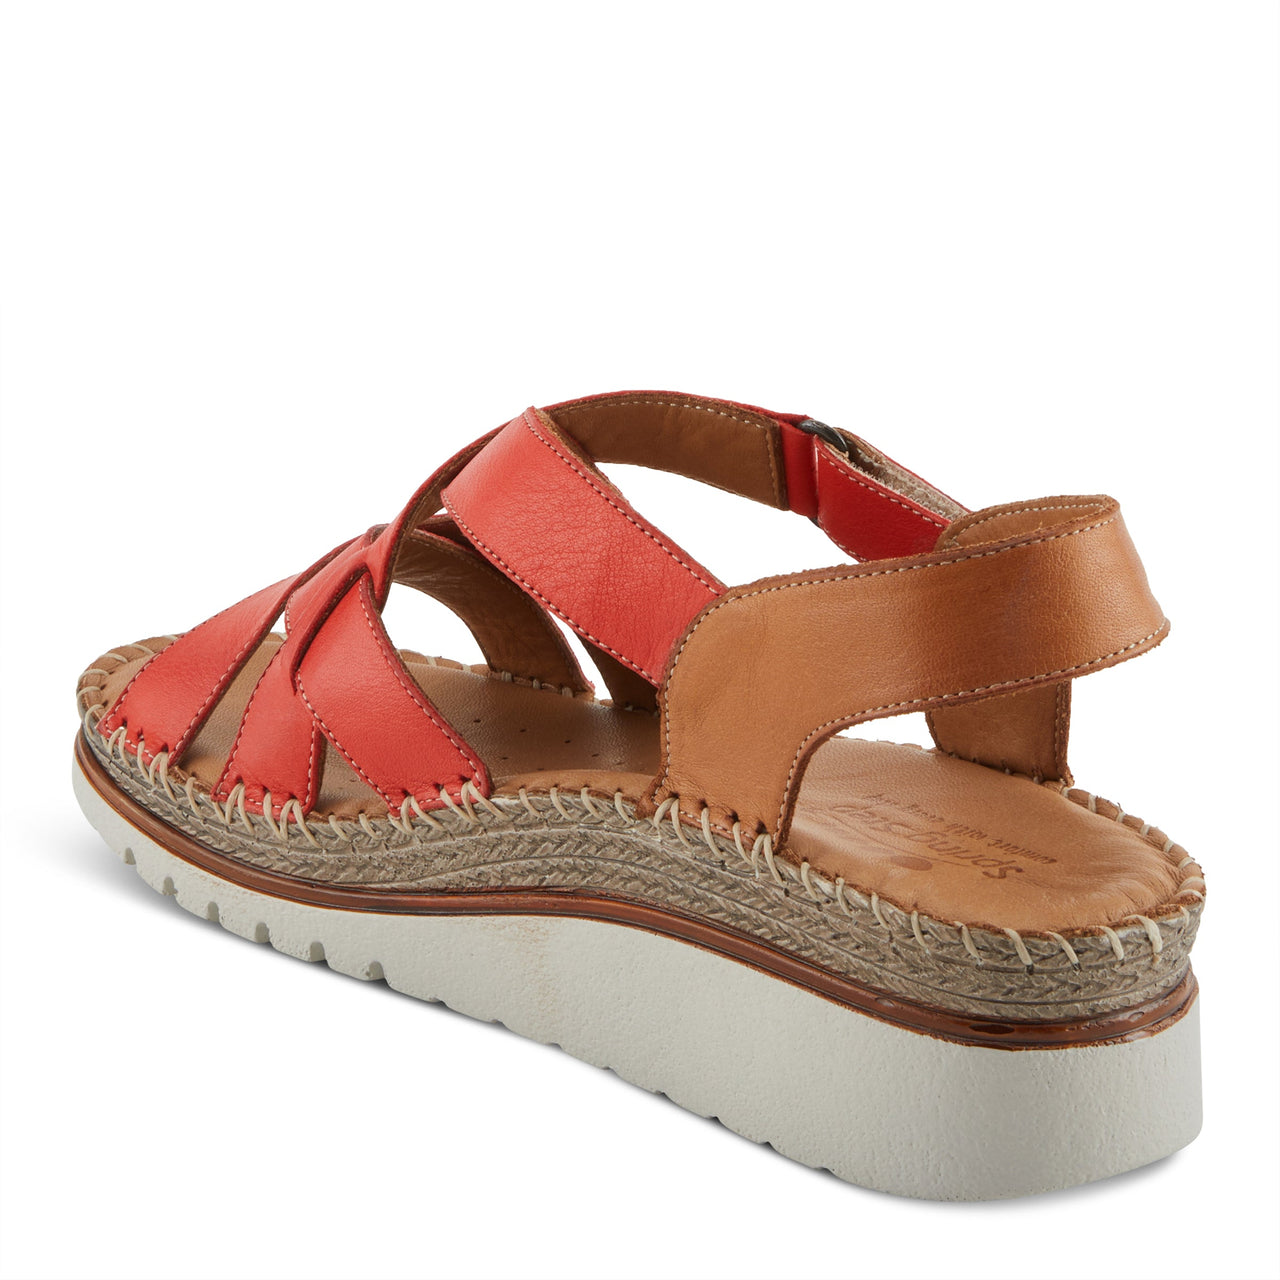 Fashionable Spring Step Migula Sandals featuring wedge heel and decorative hardware